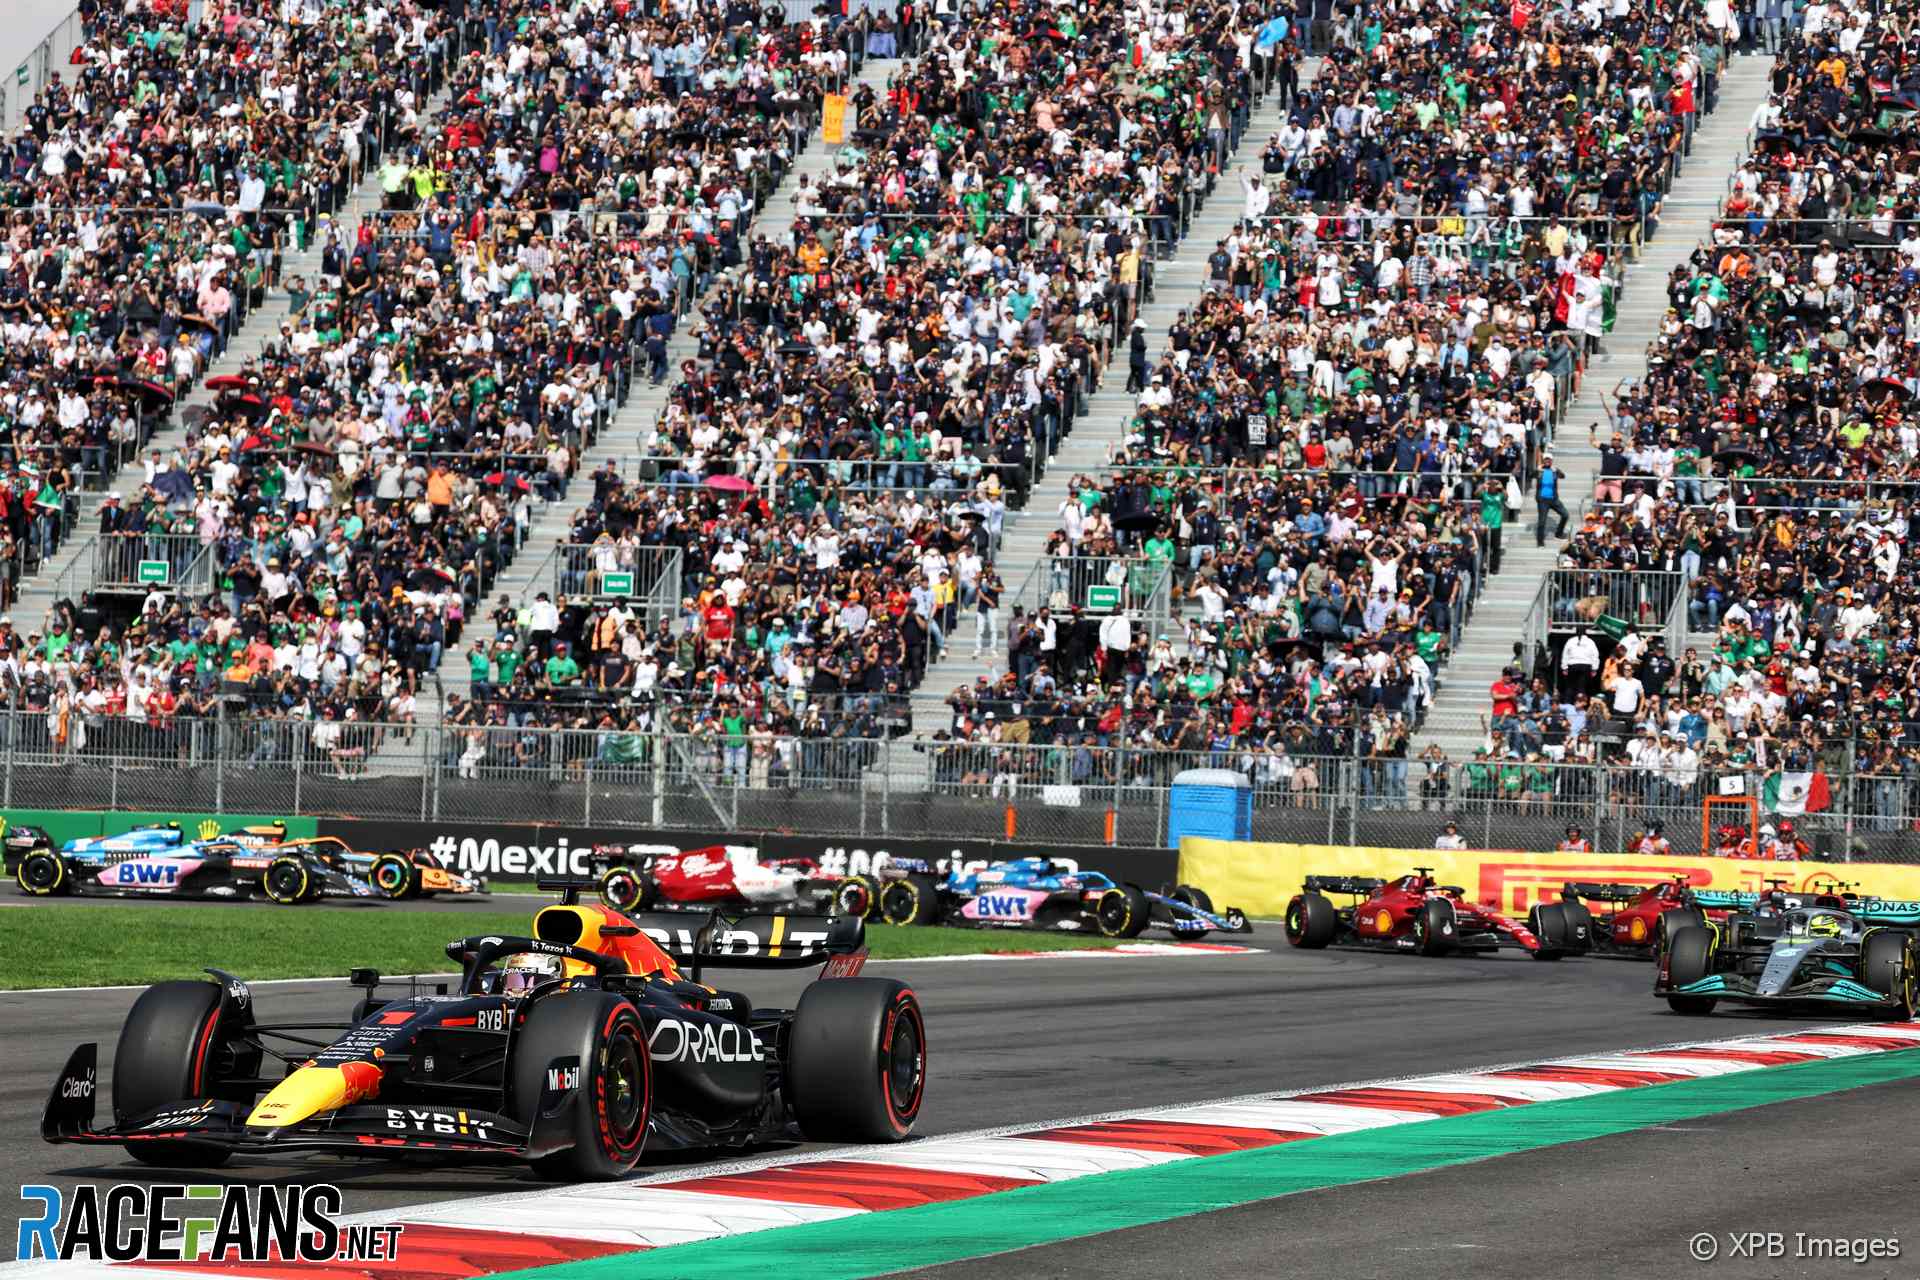 The 2022 Mexican Grand Prix was held at Autodromo Hermanos Rodriguez and won by Max Verstappen